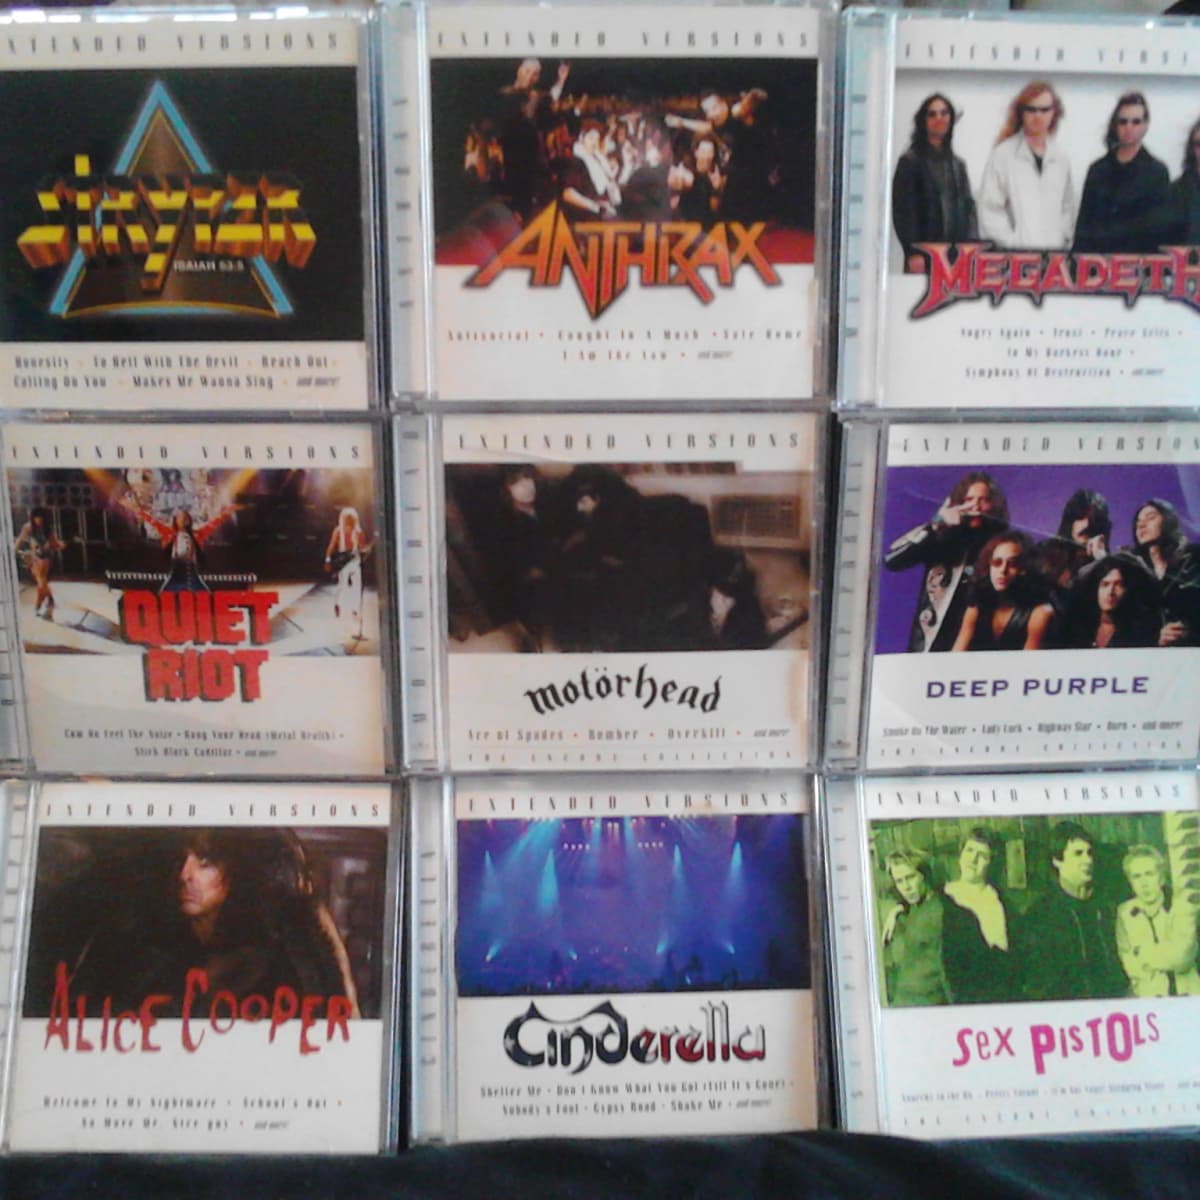 A Guide Versions" Concert CDs - Spinditty